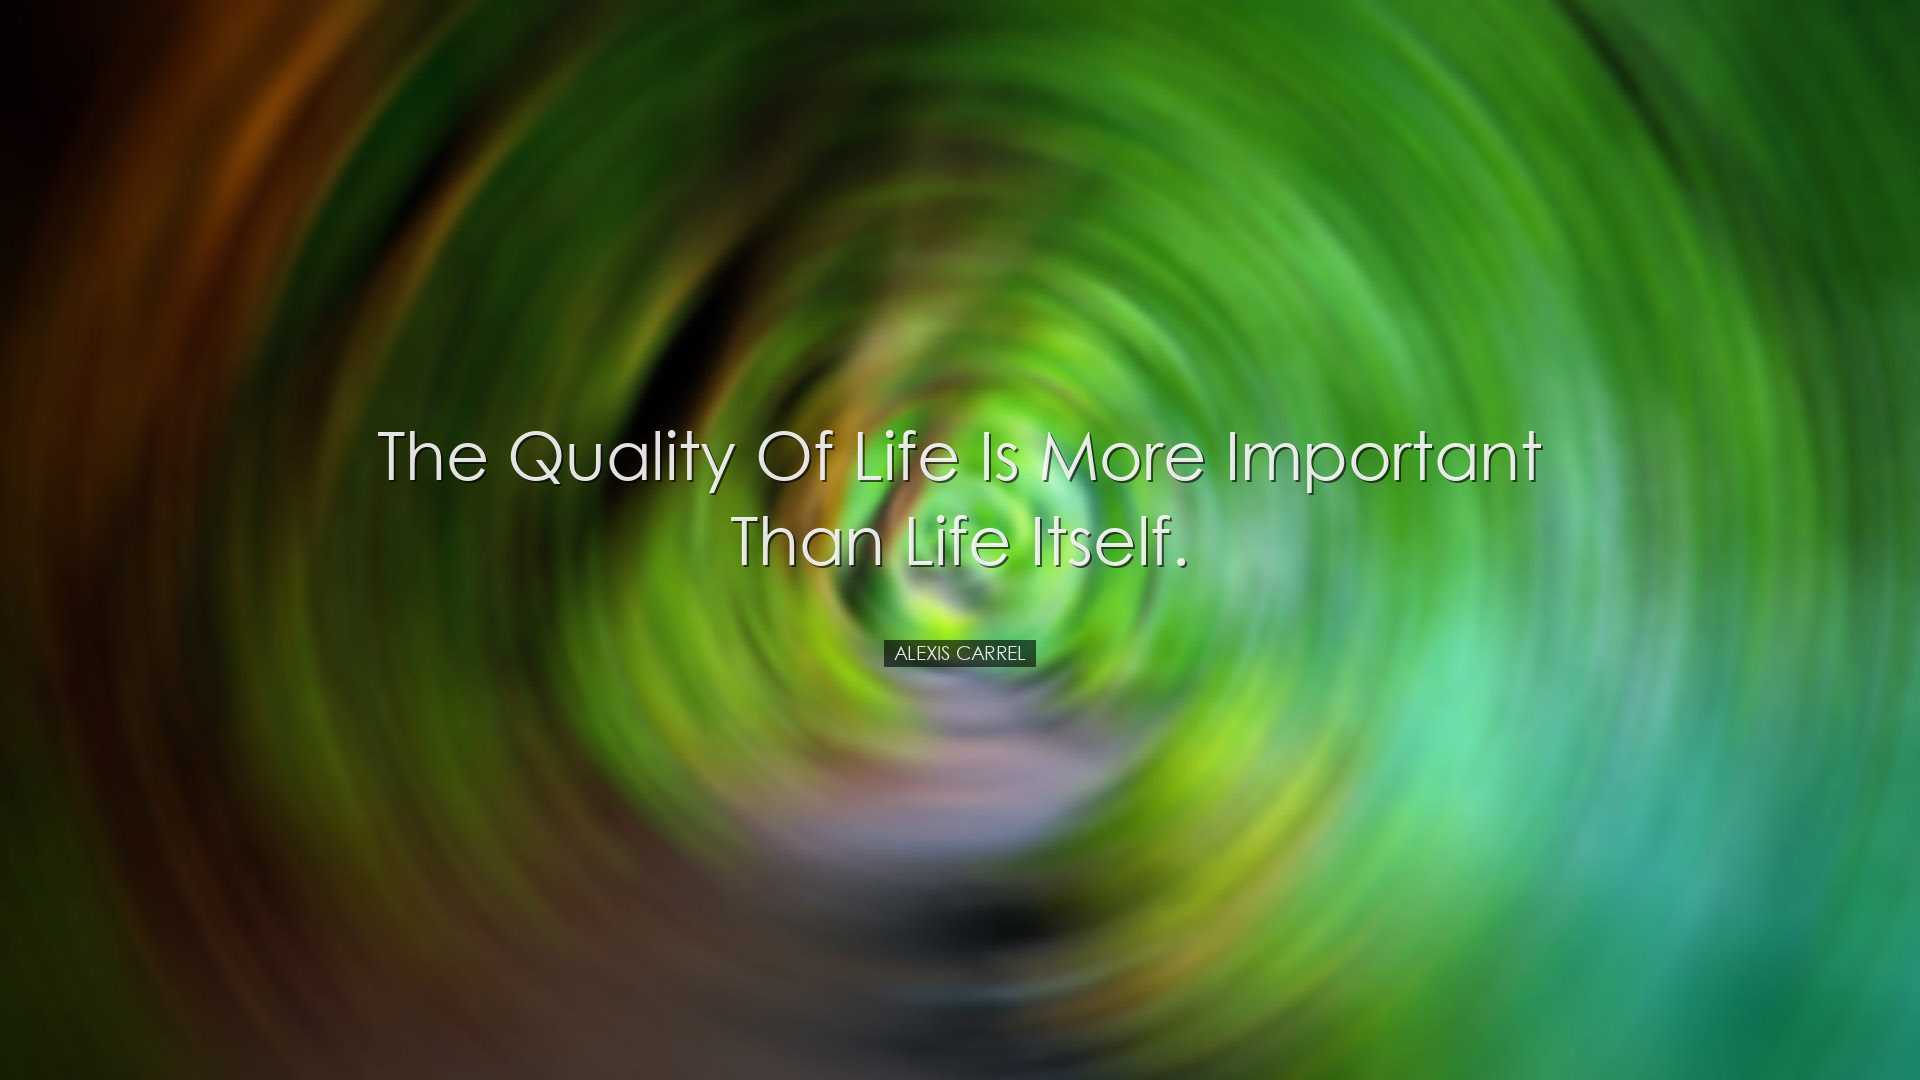 The quality of life is more important than life itself. - Alexis C